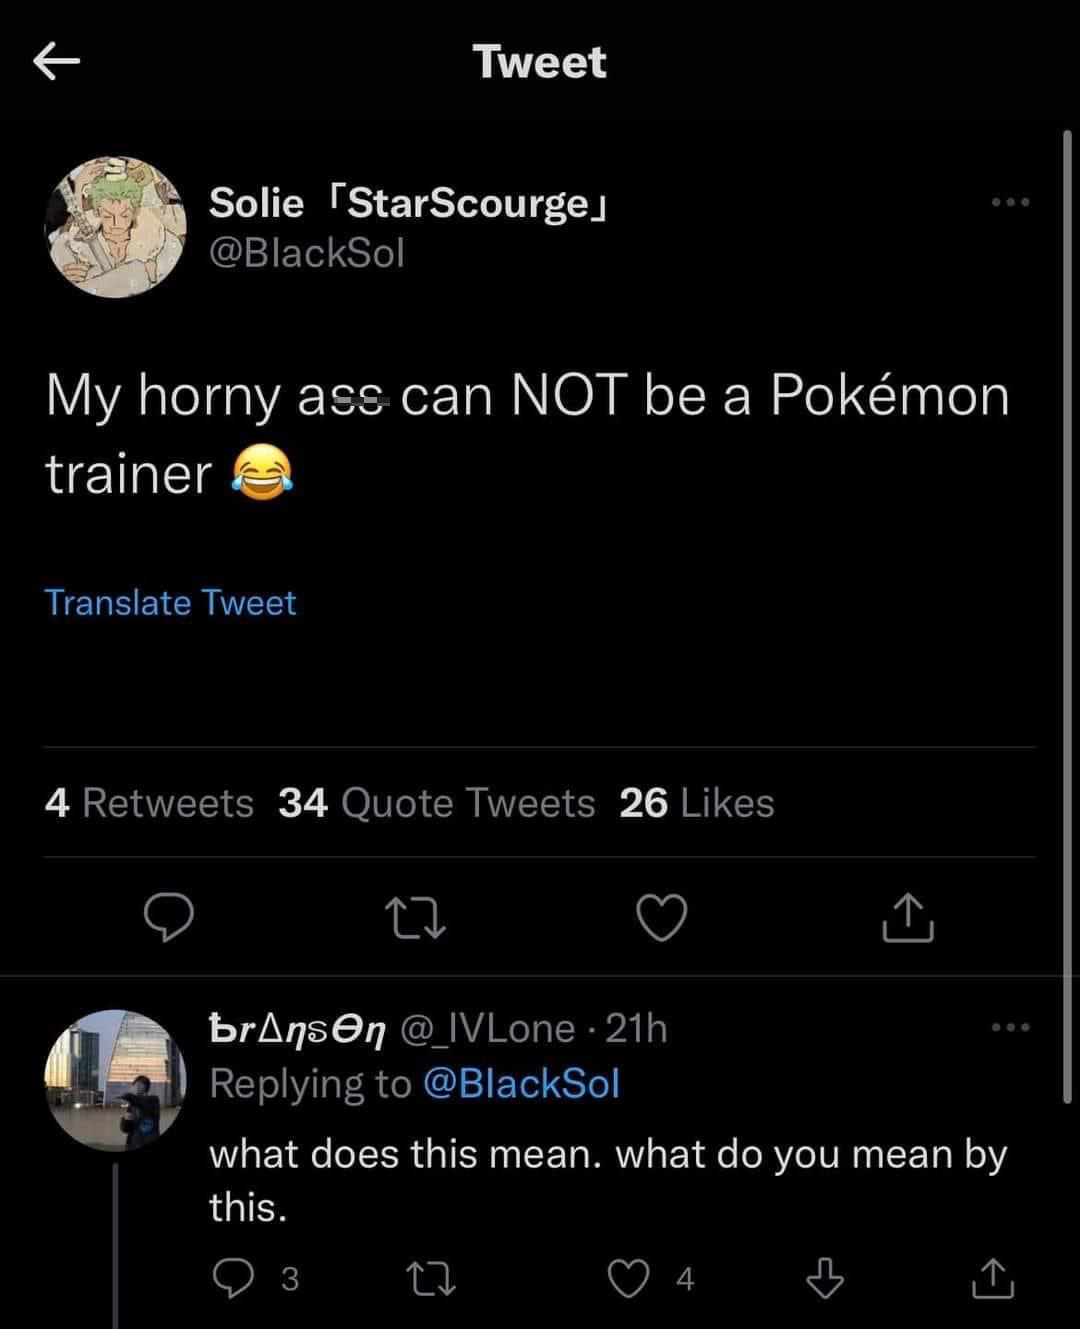 funny and savage tweets - deep twitter quotes 2021 - Solie StarScourge My horny ass can Not be a Pokmon trainer Translate Tweet Tweet 4 34 Quote Tweets 26 27 bransen @ IVLone 21h what does this mean. what do you mean by this. 3 27